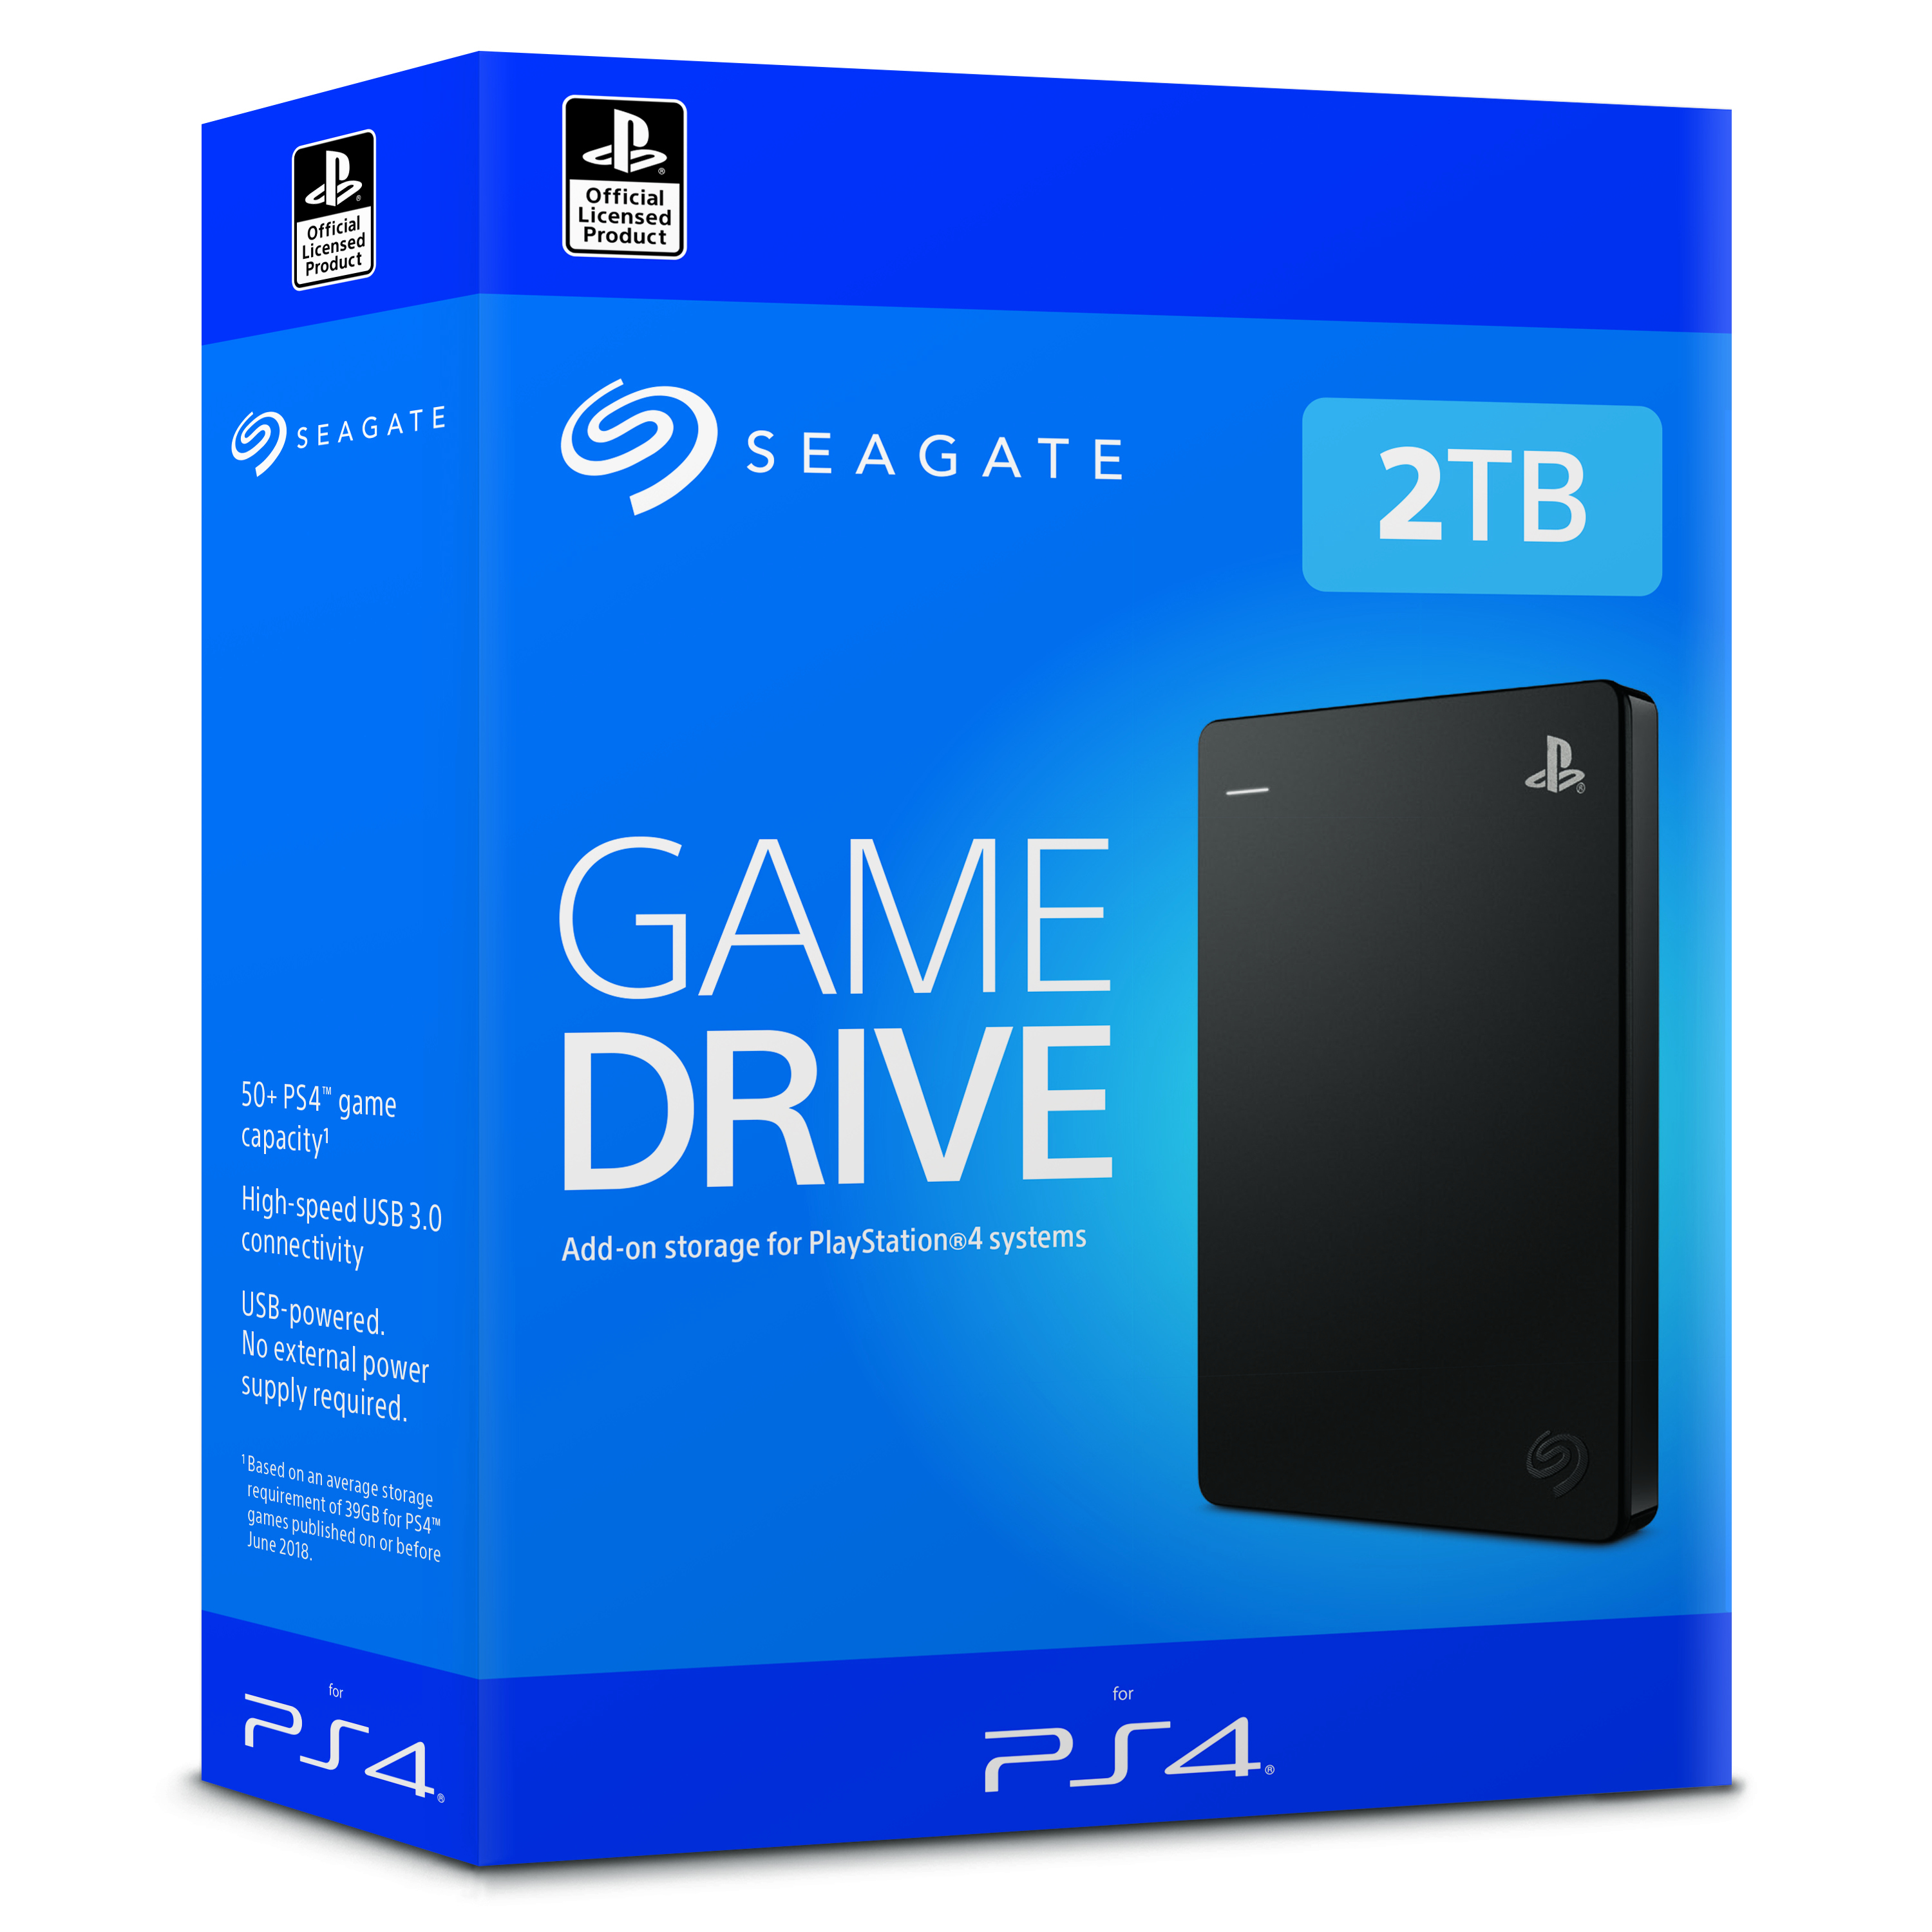 - - Drive TB Game STGD2000200 Festplatte Seagate (tragbar) - 2 | PS4 extern for STGD2000200 Seagate